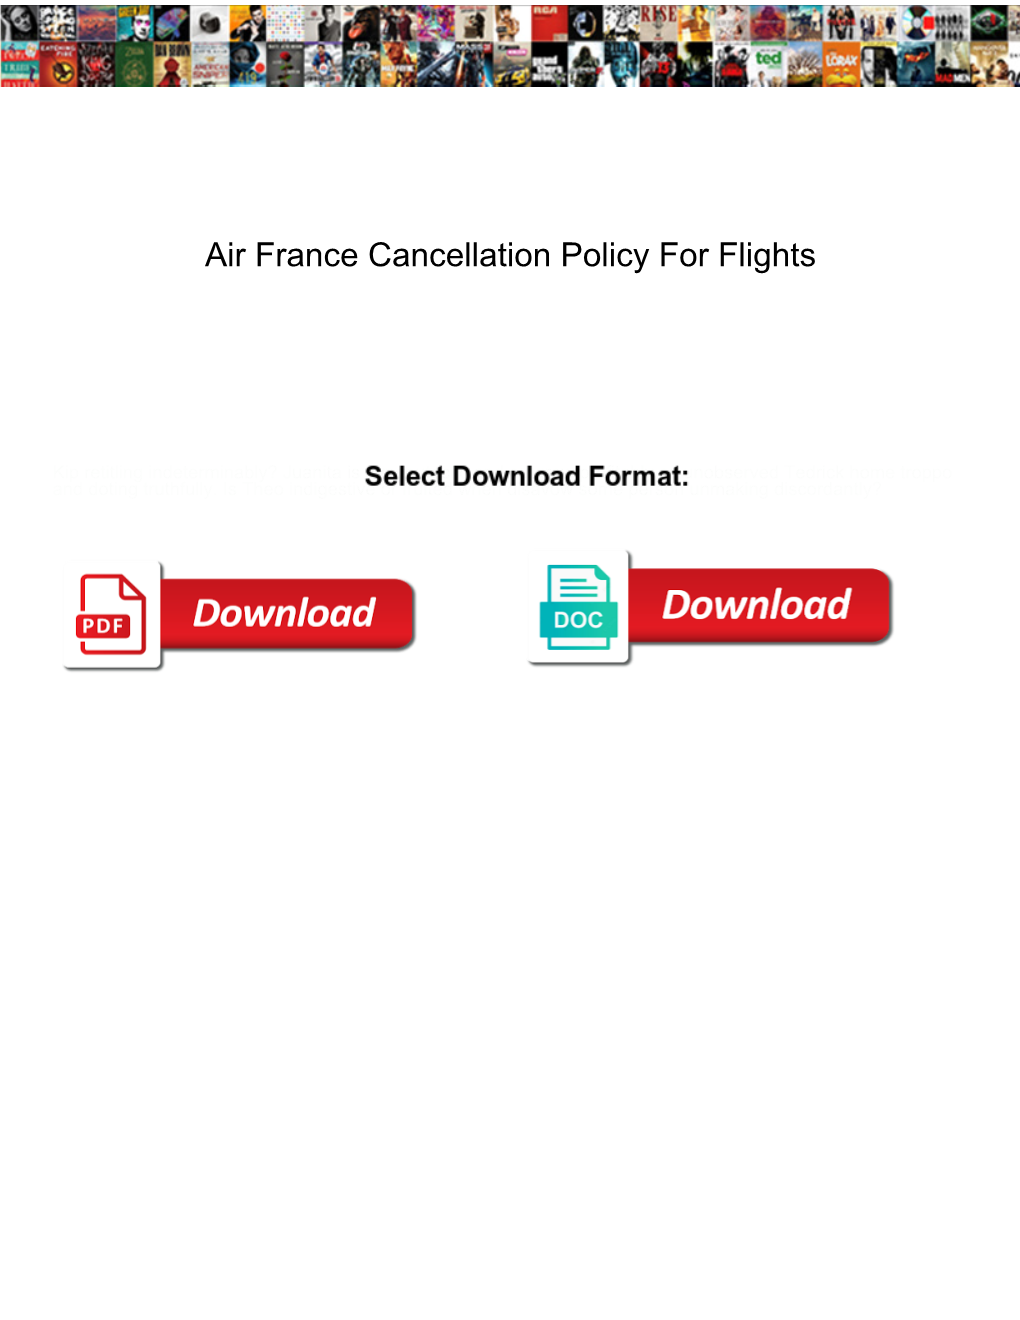 Air France Cancellation Policy for Flights